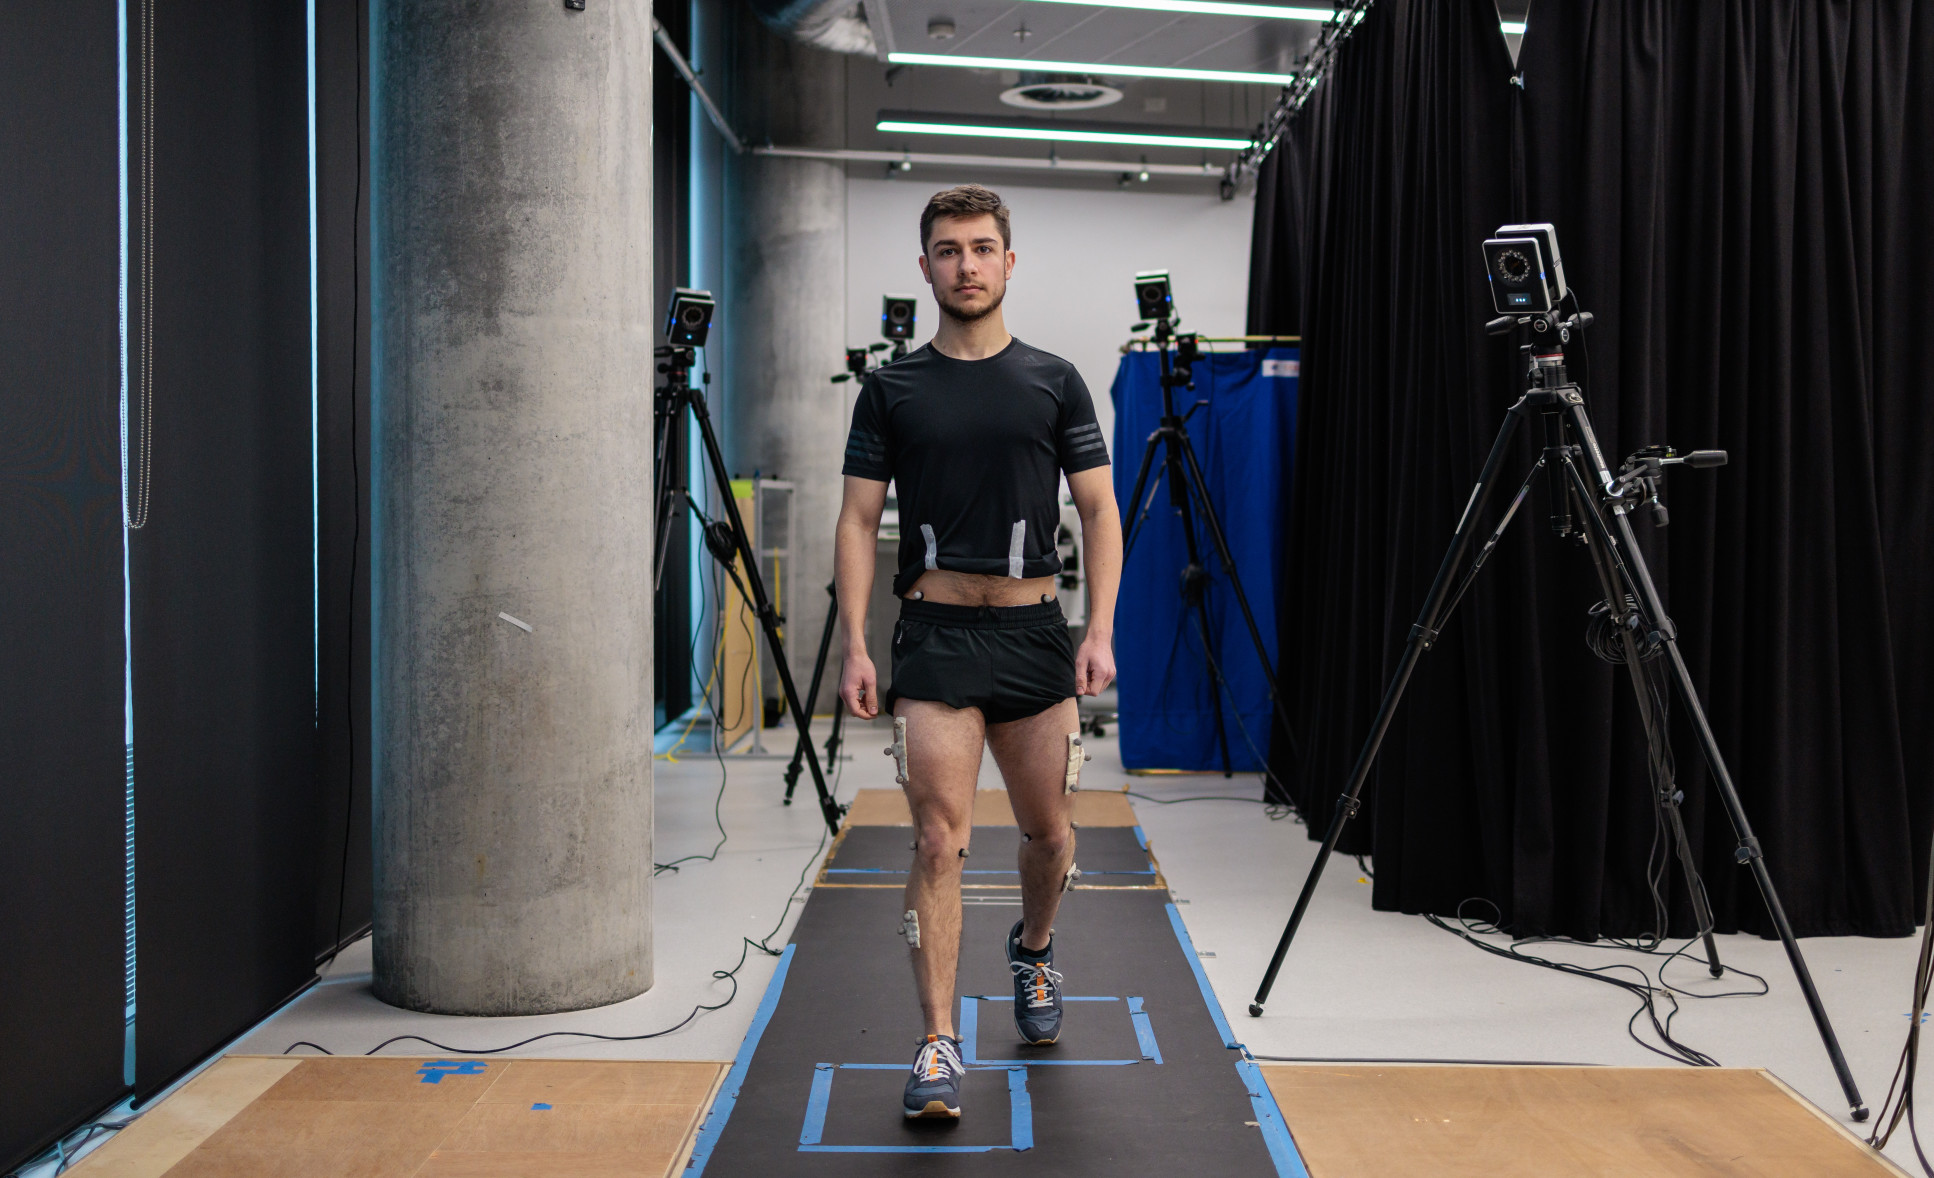 A demonstration of how motion capture technology analyses the movements of people using prosthetic limbs in detail to see how they can be improved. (Credit: Brendan Foster Photography.)